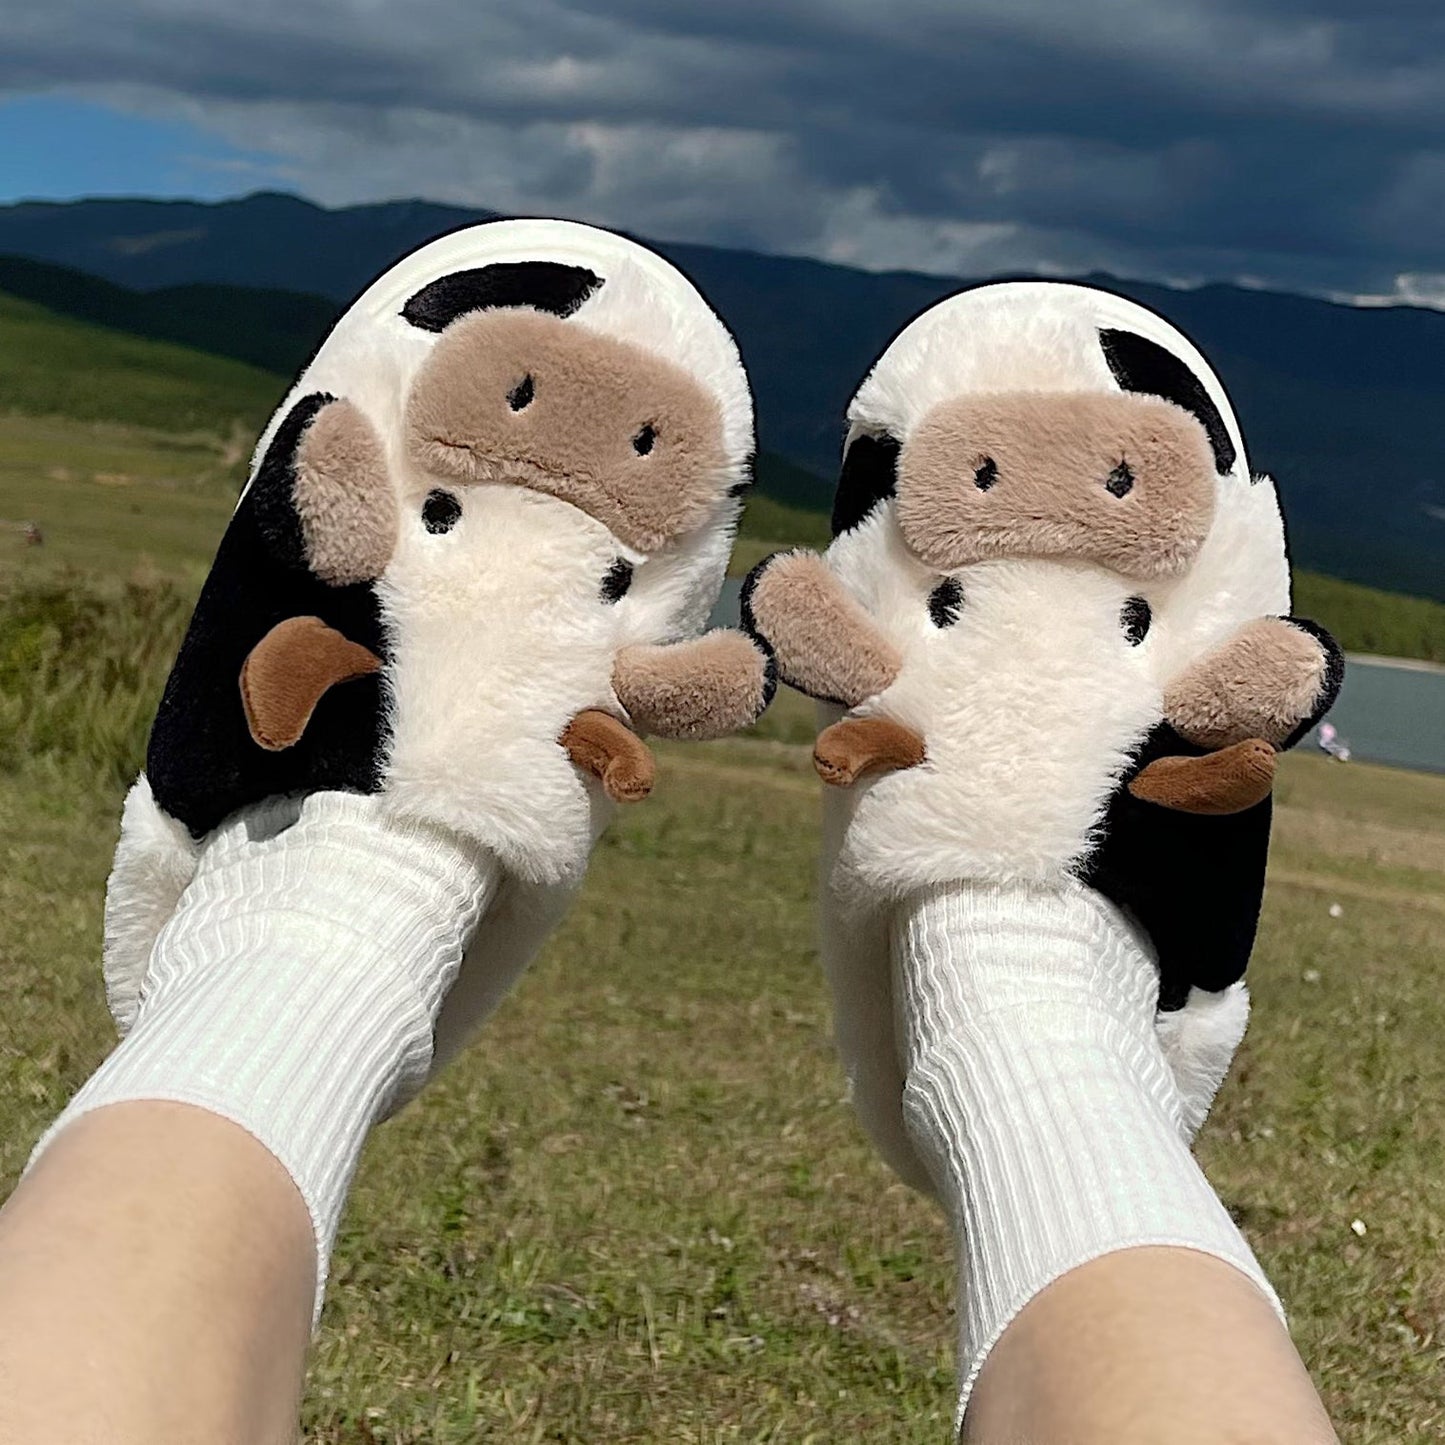 Cute Animal Soft Slippers - K&L Trending Products